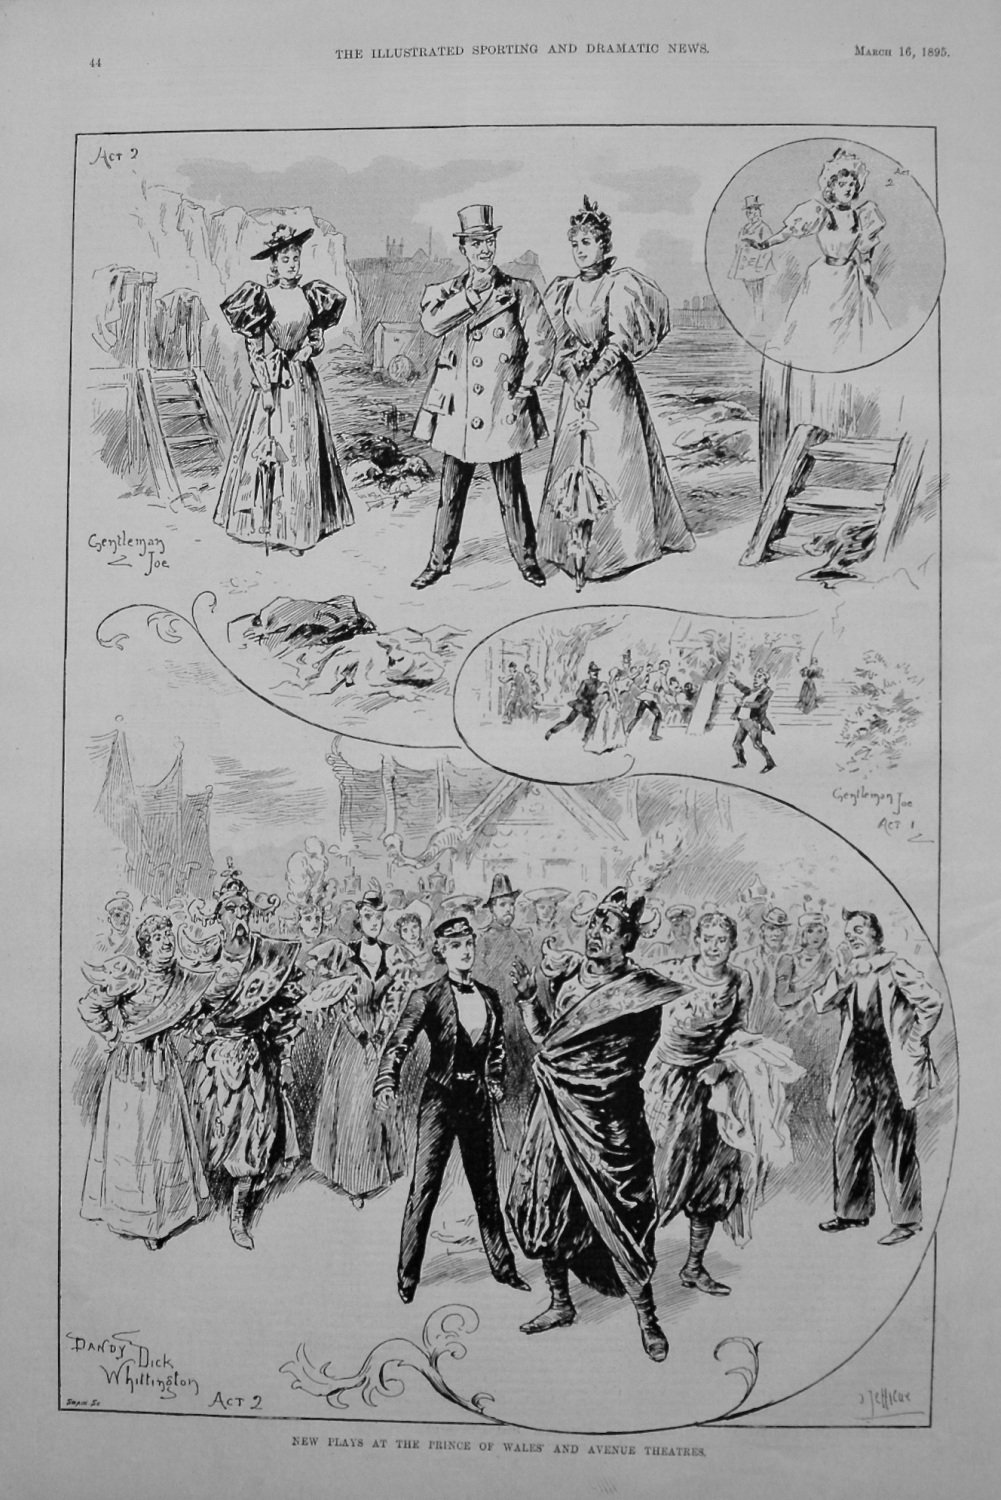 New Plays at the Prince of Wales' and Avenue Theatres. 1895